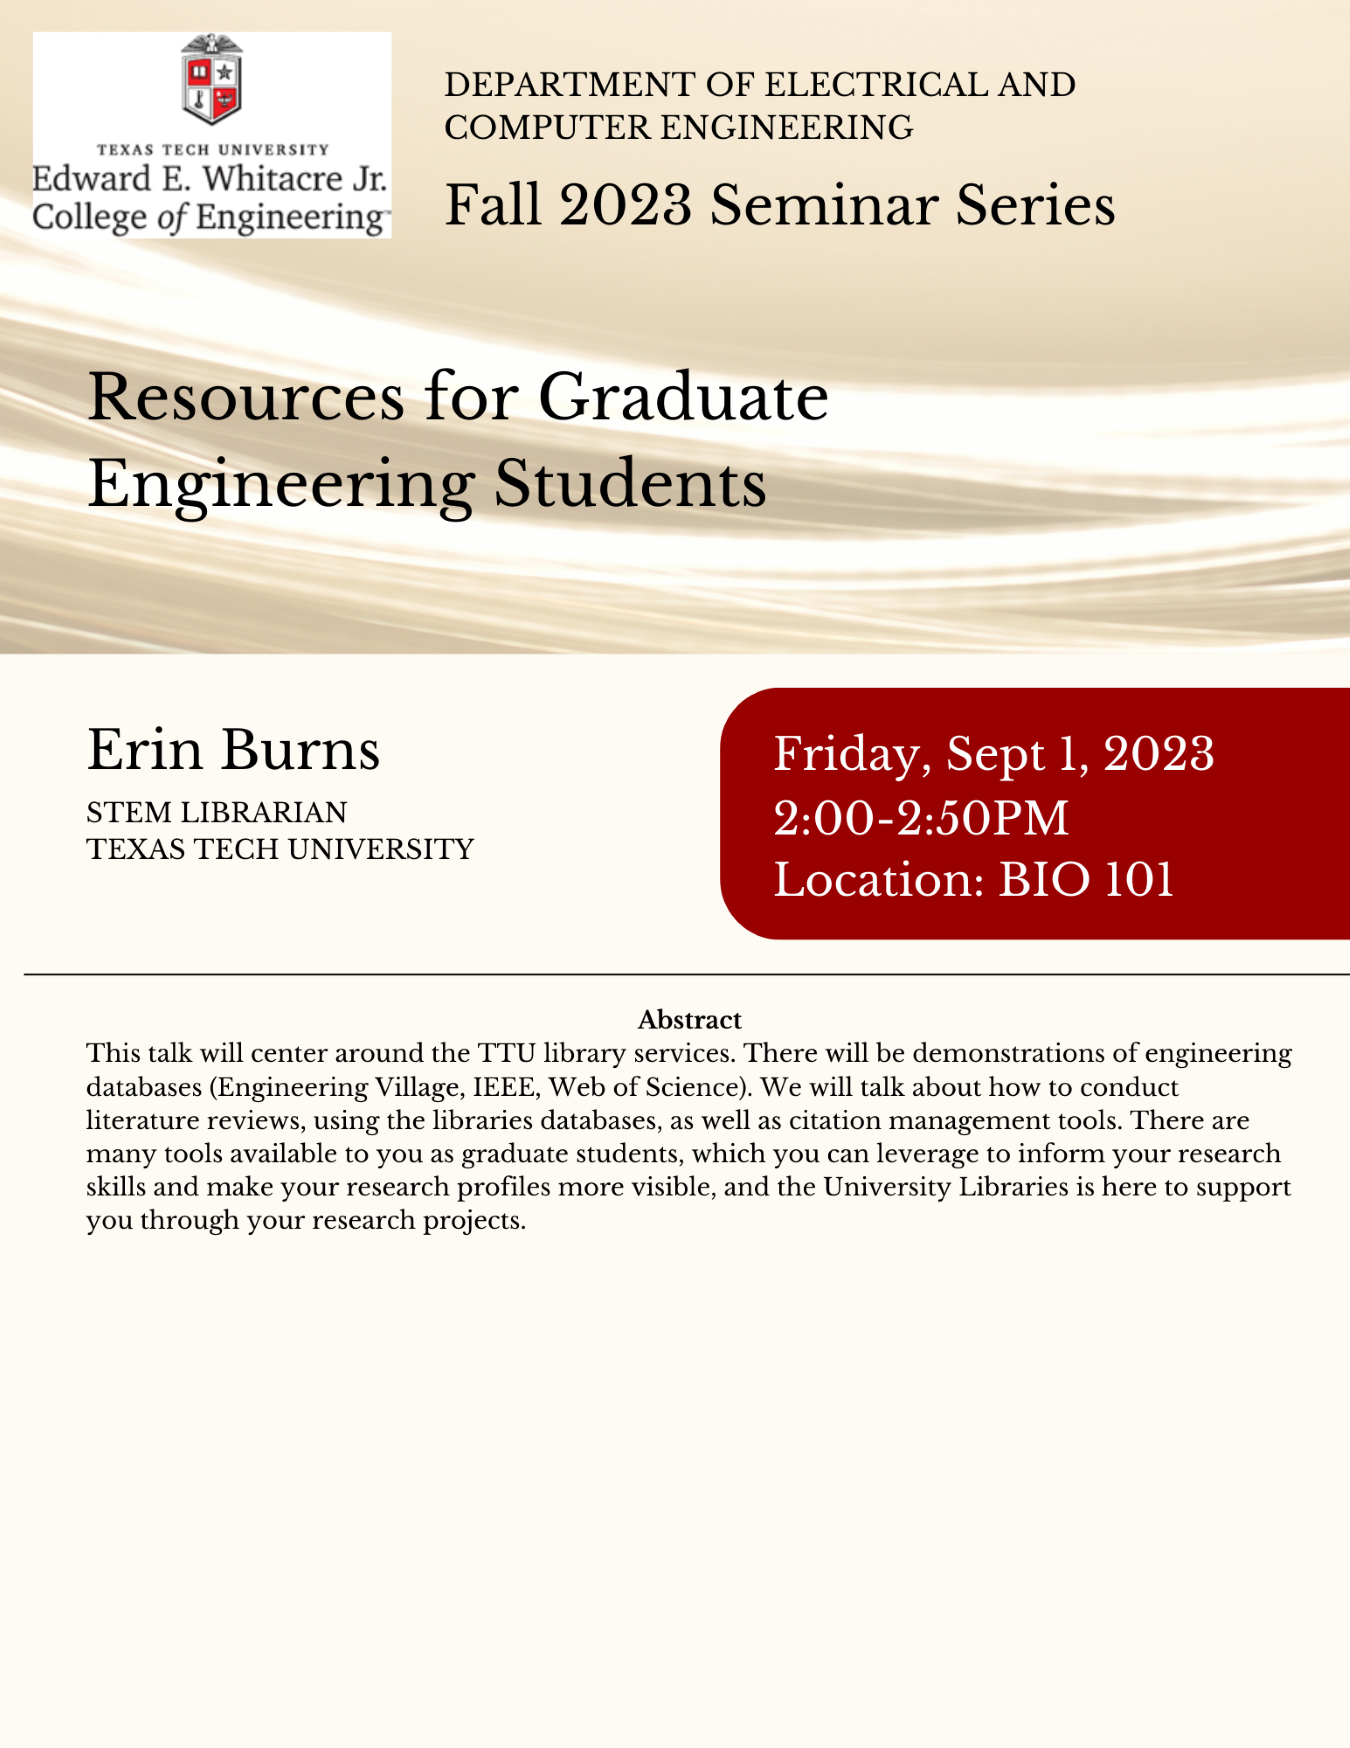 Resources for Graduate Engineering Students